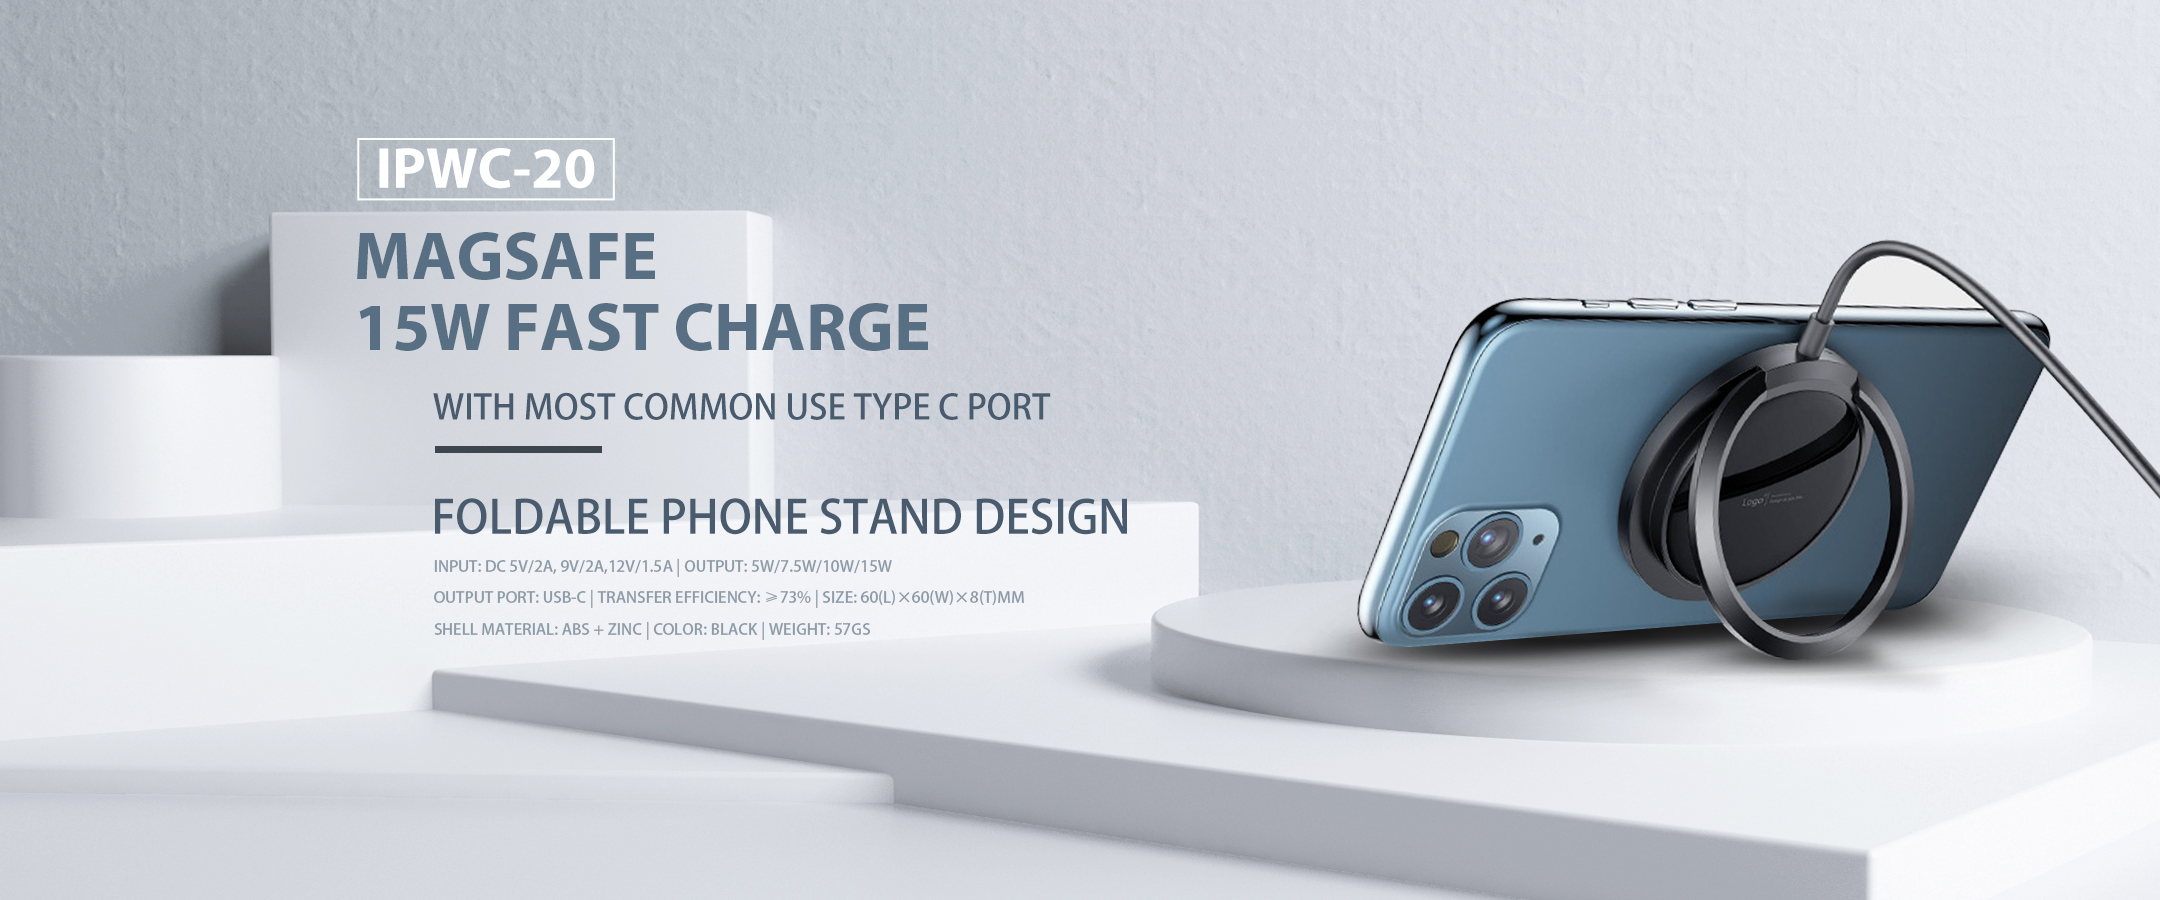 Wireless charger with Phone stand